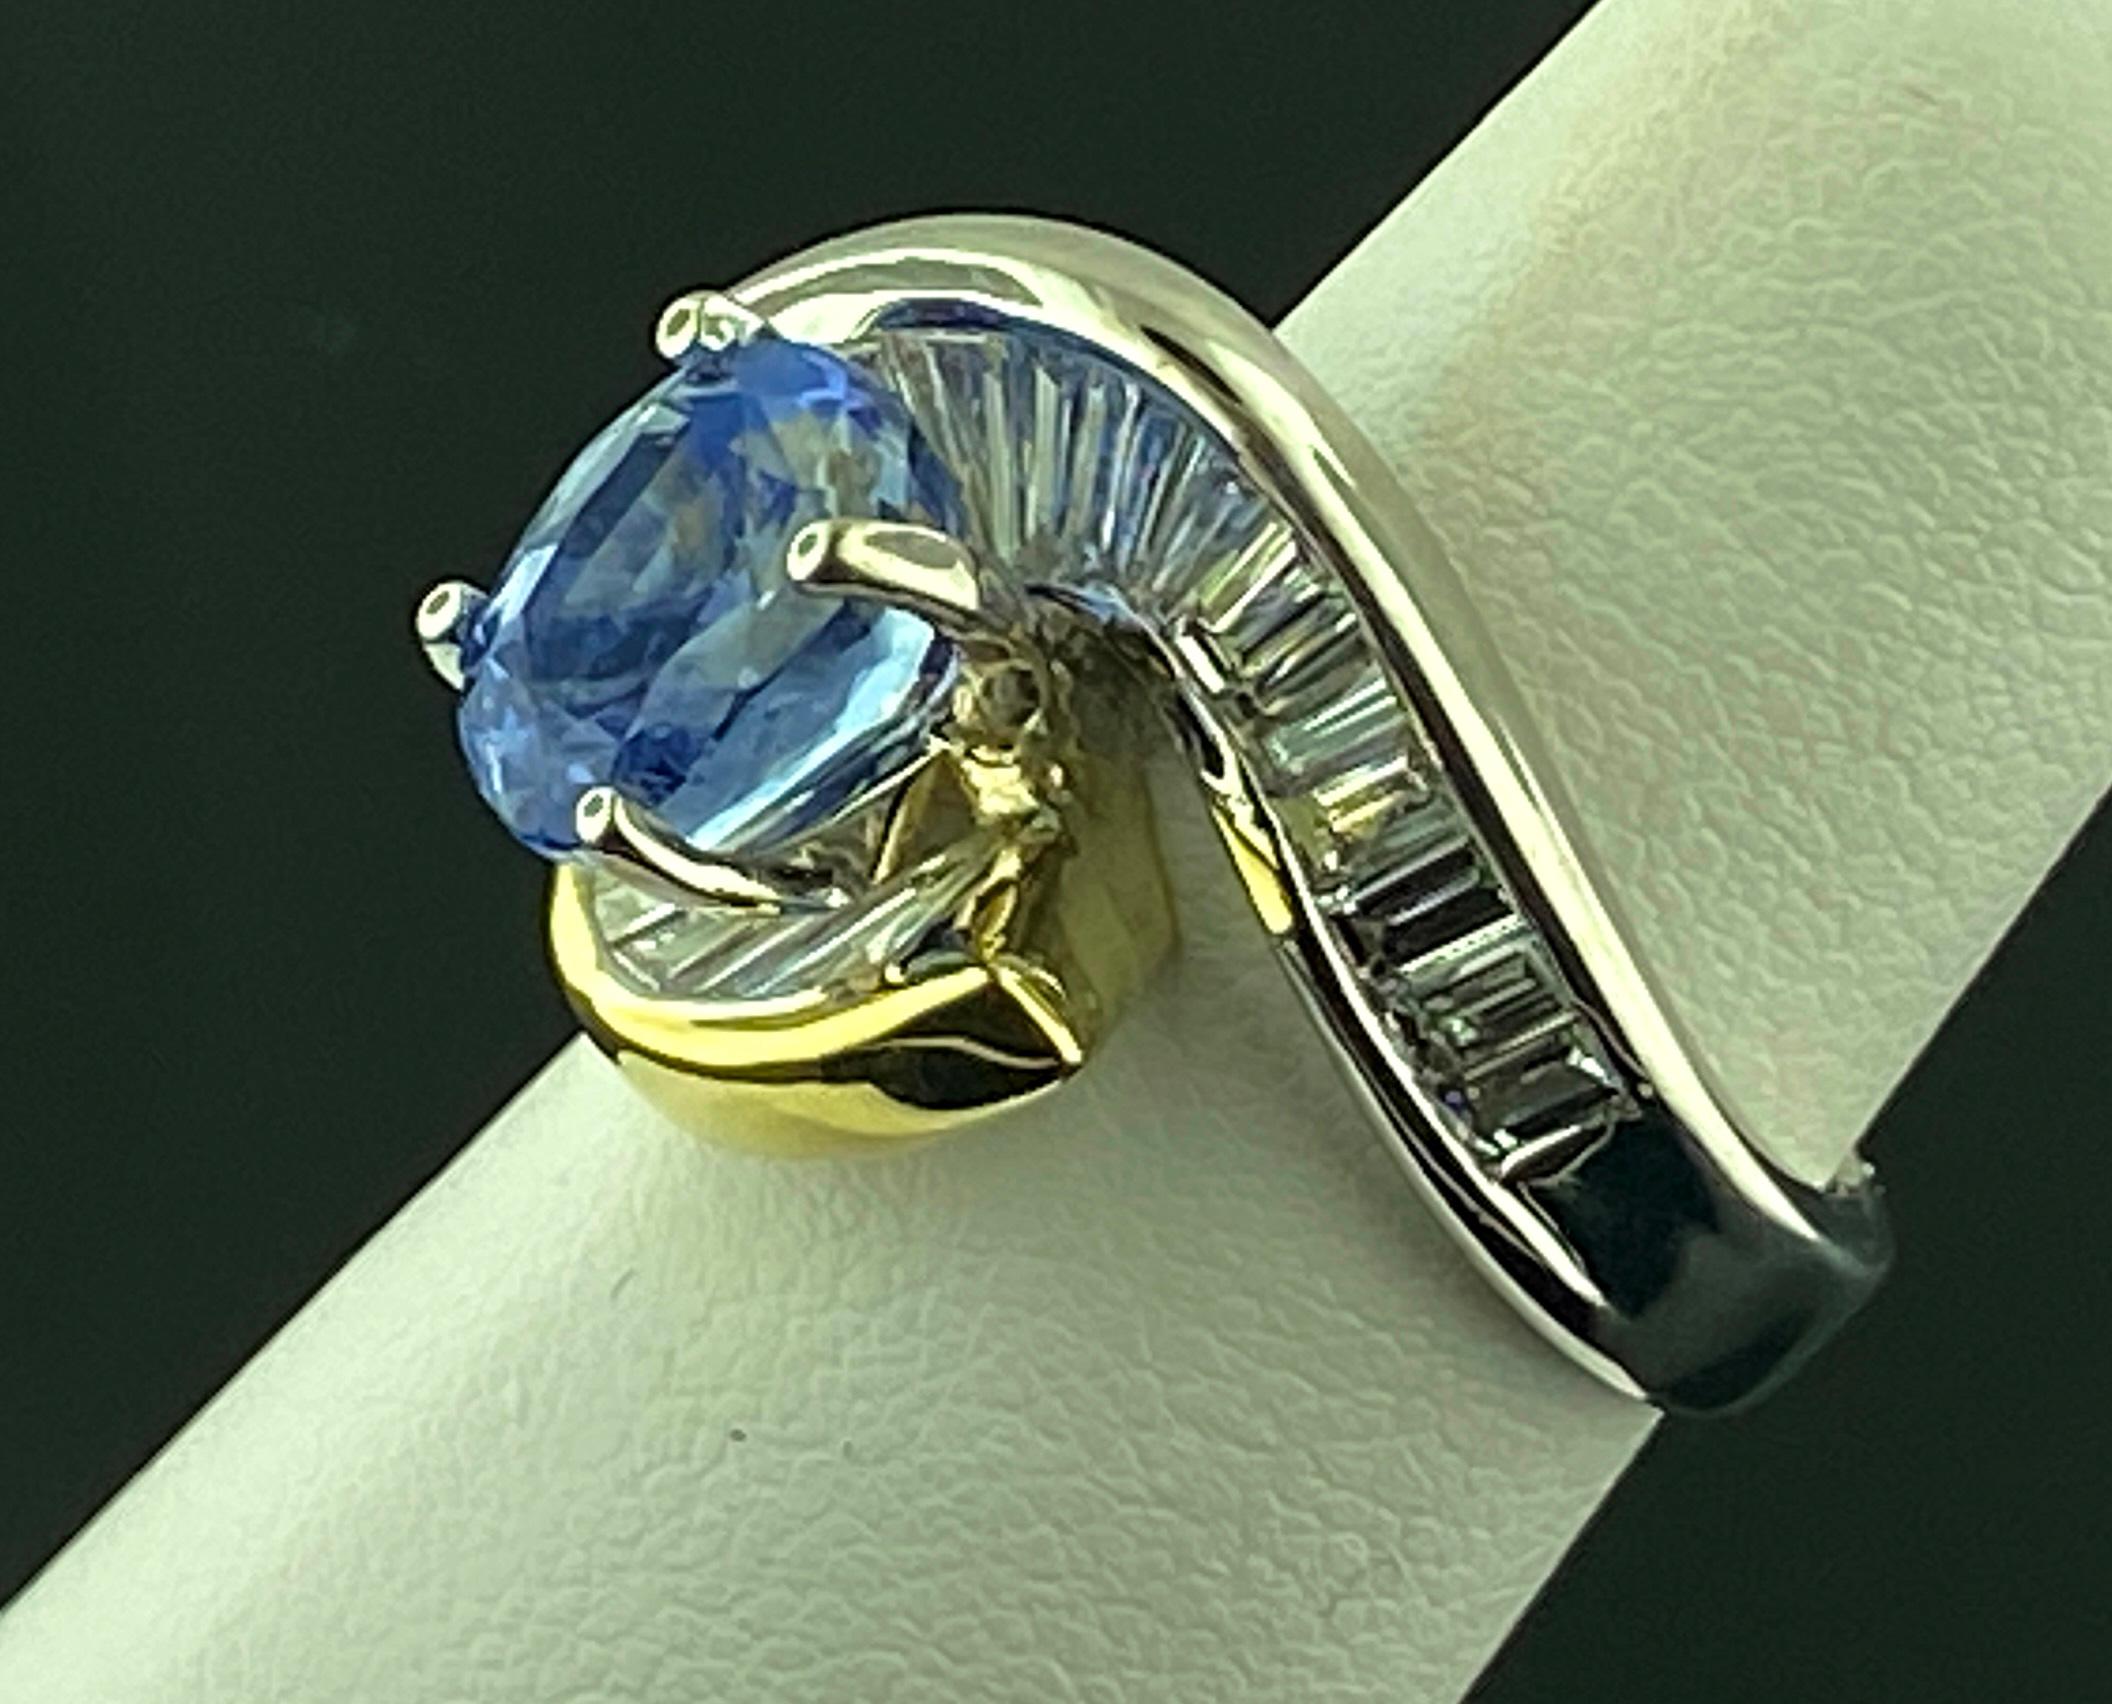 Oval Cut 18 KT White & Yellow Gold Ring with a 4.03 Ct Blue Sapphire and 2.0 Cts Diamonds